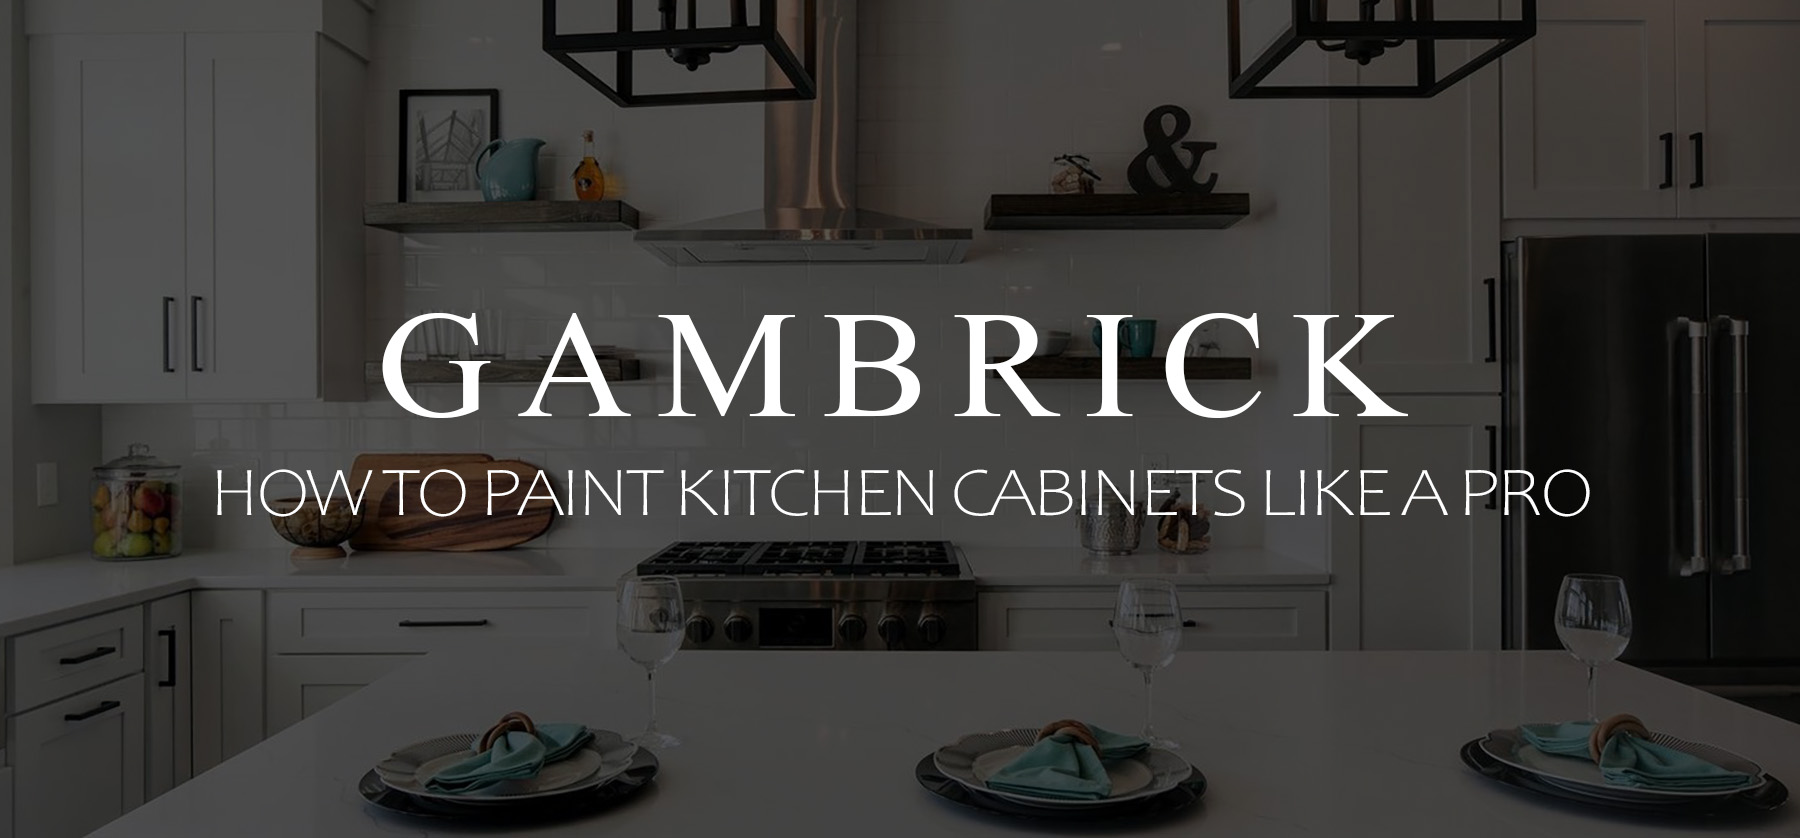 how to paint kitchen cabinets like a pro banner pic